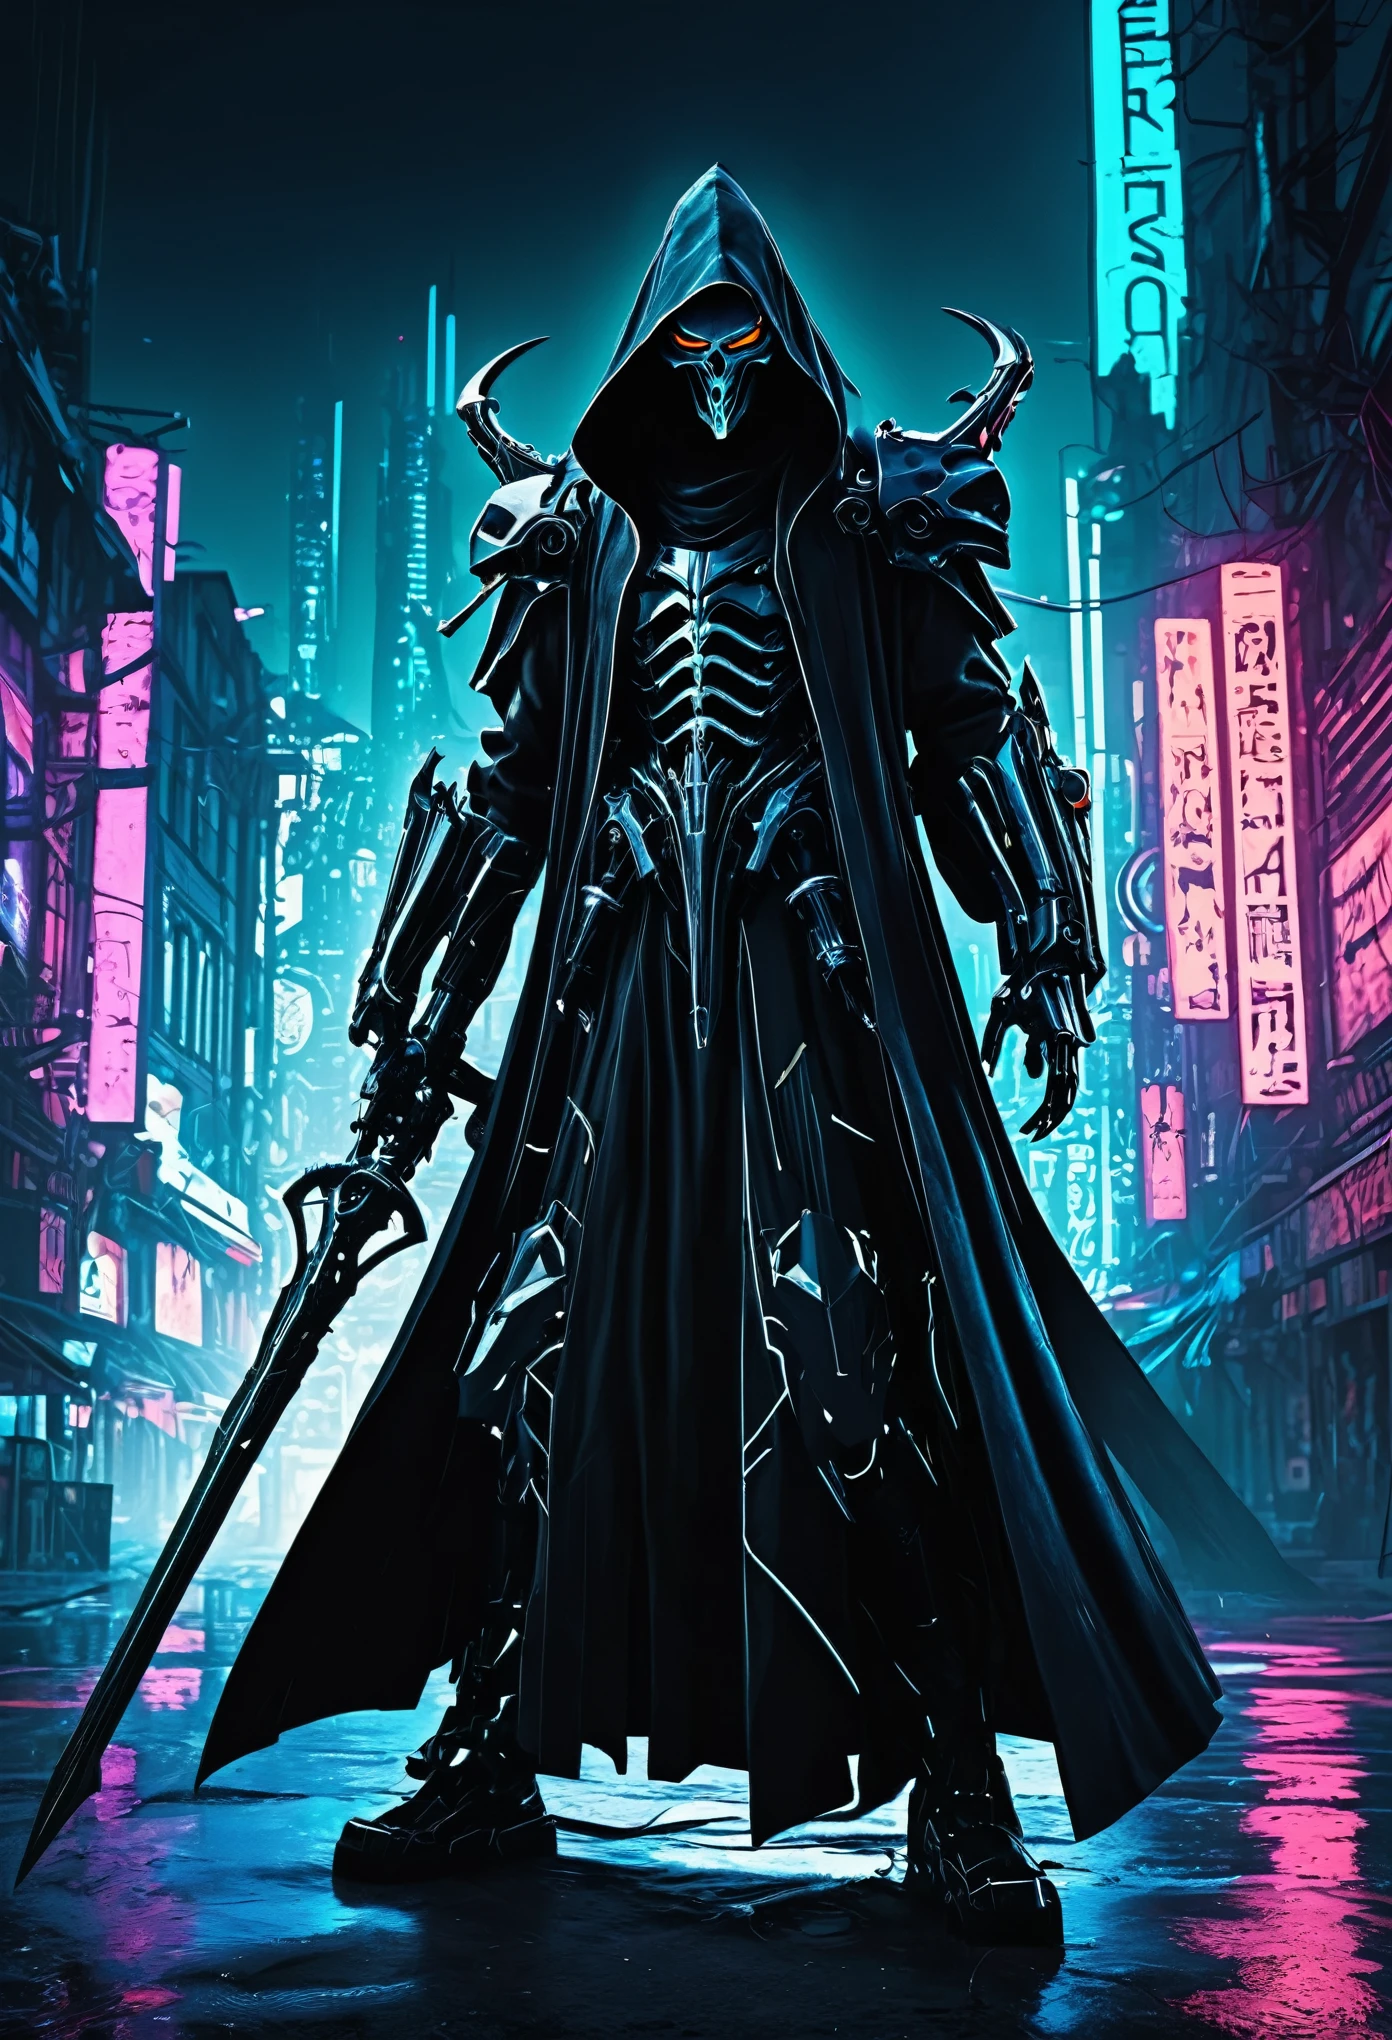 (best quality, highres), detailed mecha Black Grim Reaper, black robe，limbs, scythe weapon, ominous presence, dramatic shadows, dystopian atmosphere, cyberpunk aesthetic, metallic textures, hauntingly beautiful, intense color contrast, dynamic composition,futuristic cityscape, glowing neon lights, 